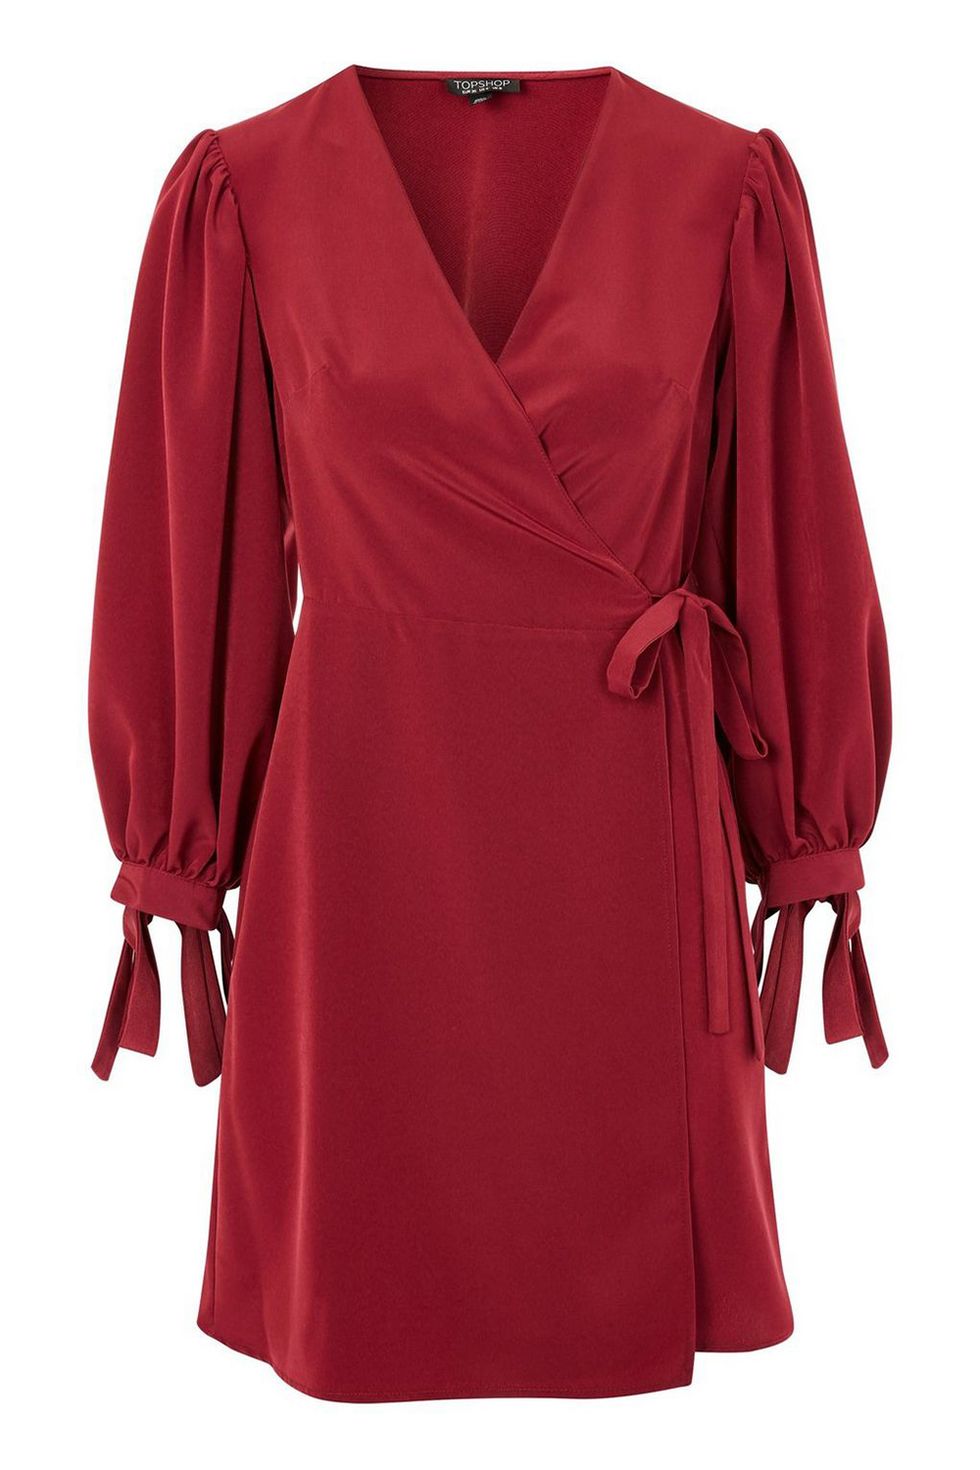 Clothing, Sleeve, Red, Dress, Outerwear, Neck, Robe, Blouse, Magenta, Day dress, 